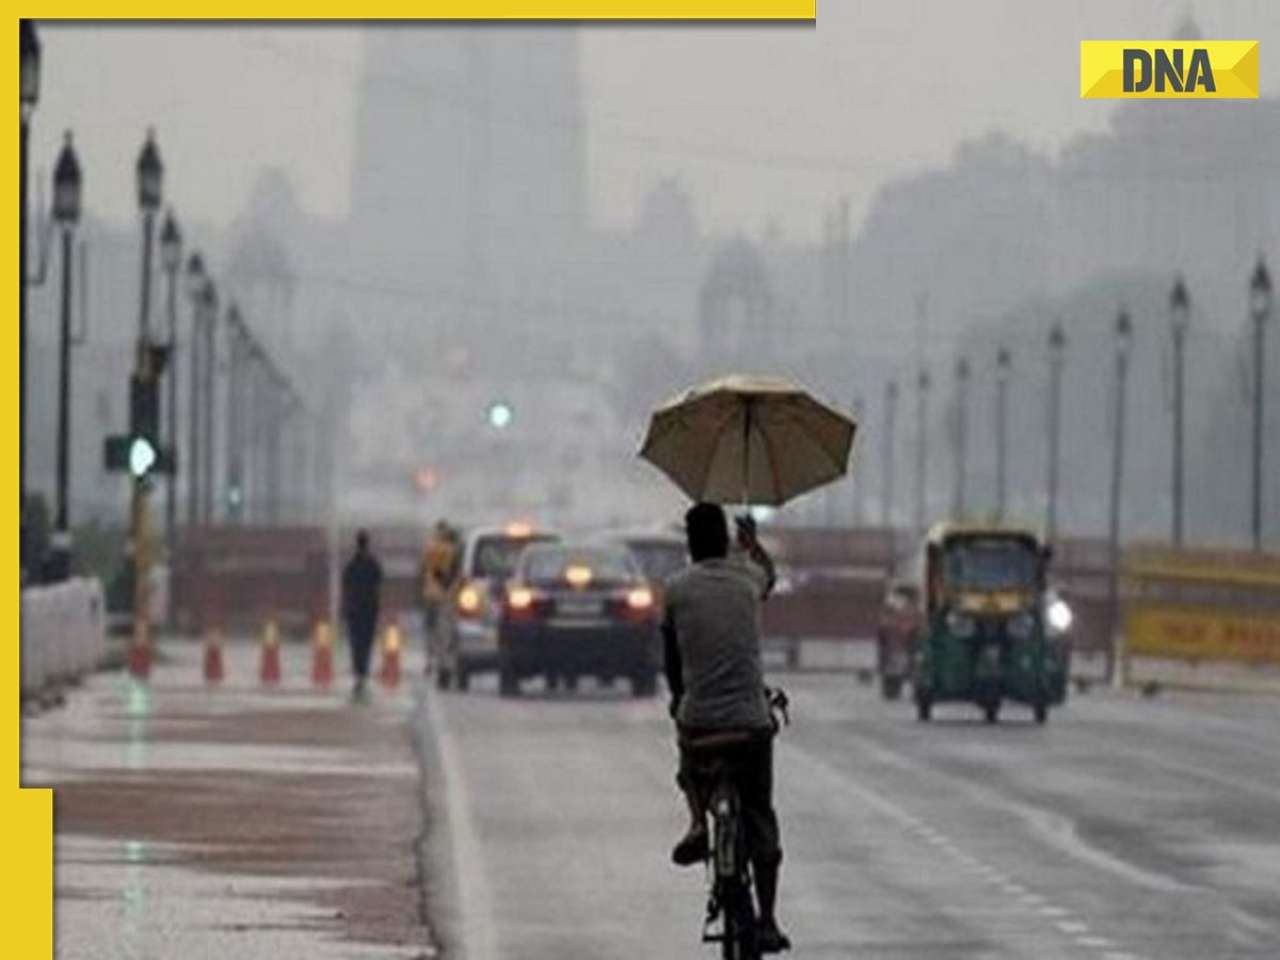 Weather update: IMD predicts light to moderate rain, thunderstorms in Delhi-NCR; check forecast here